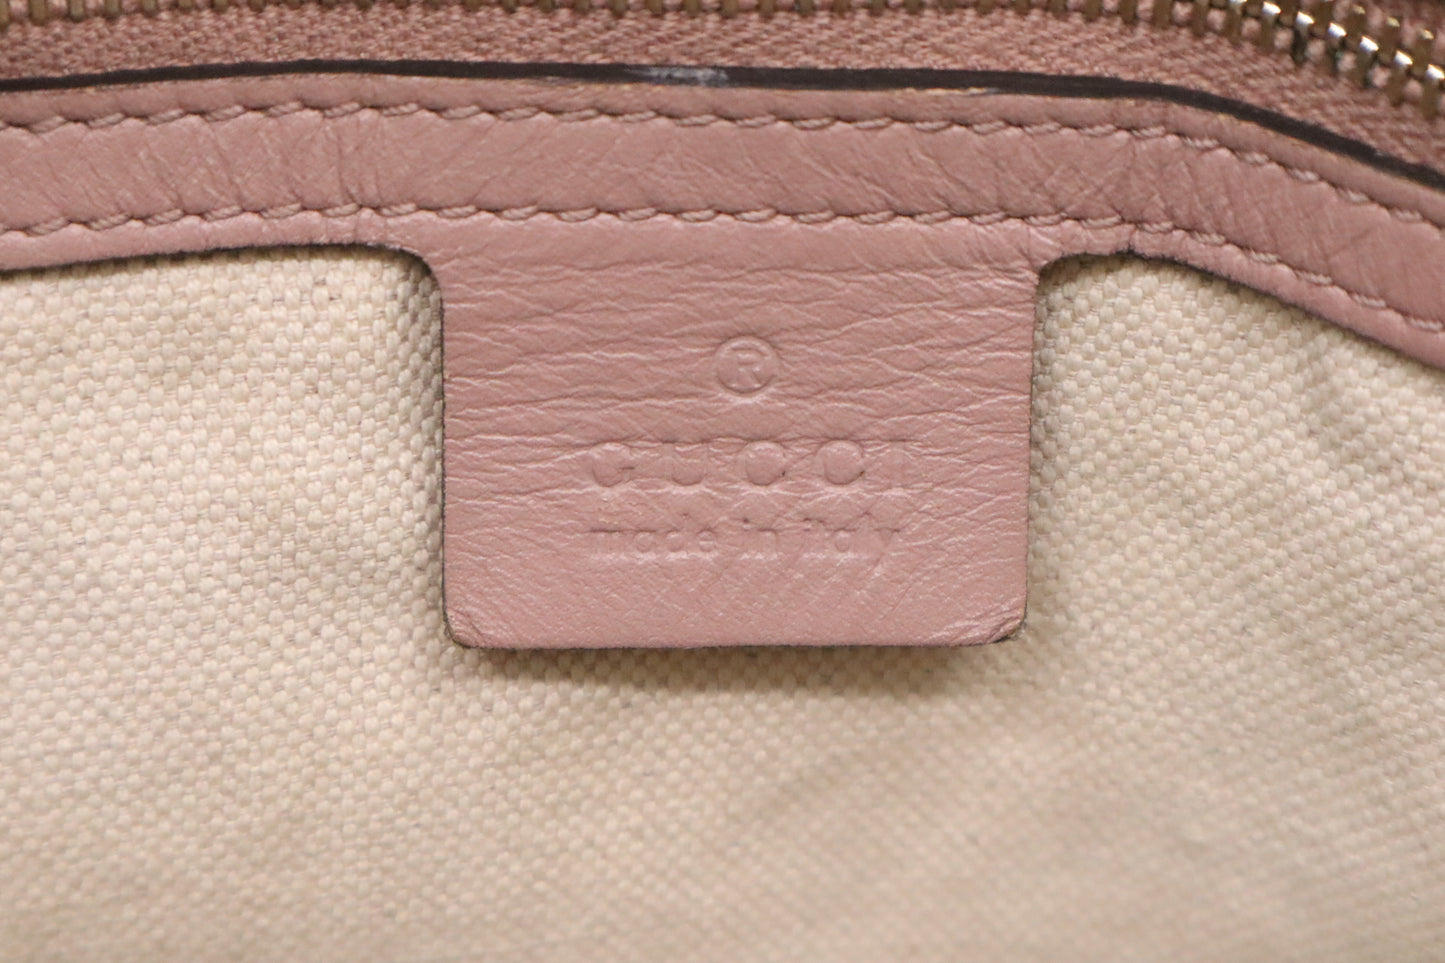 Gucci Boston Bag in GG Canvas and Pink Leather